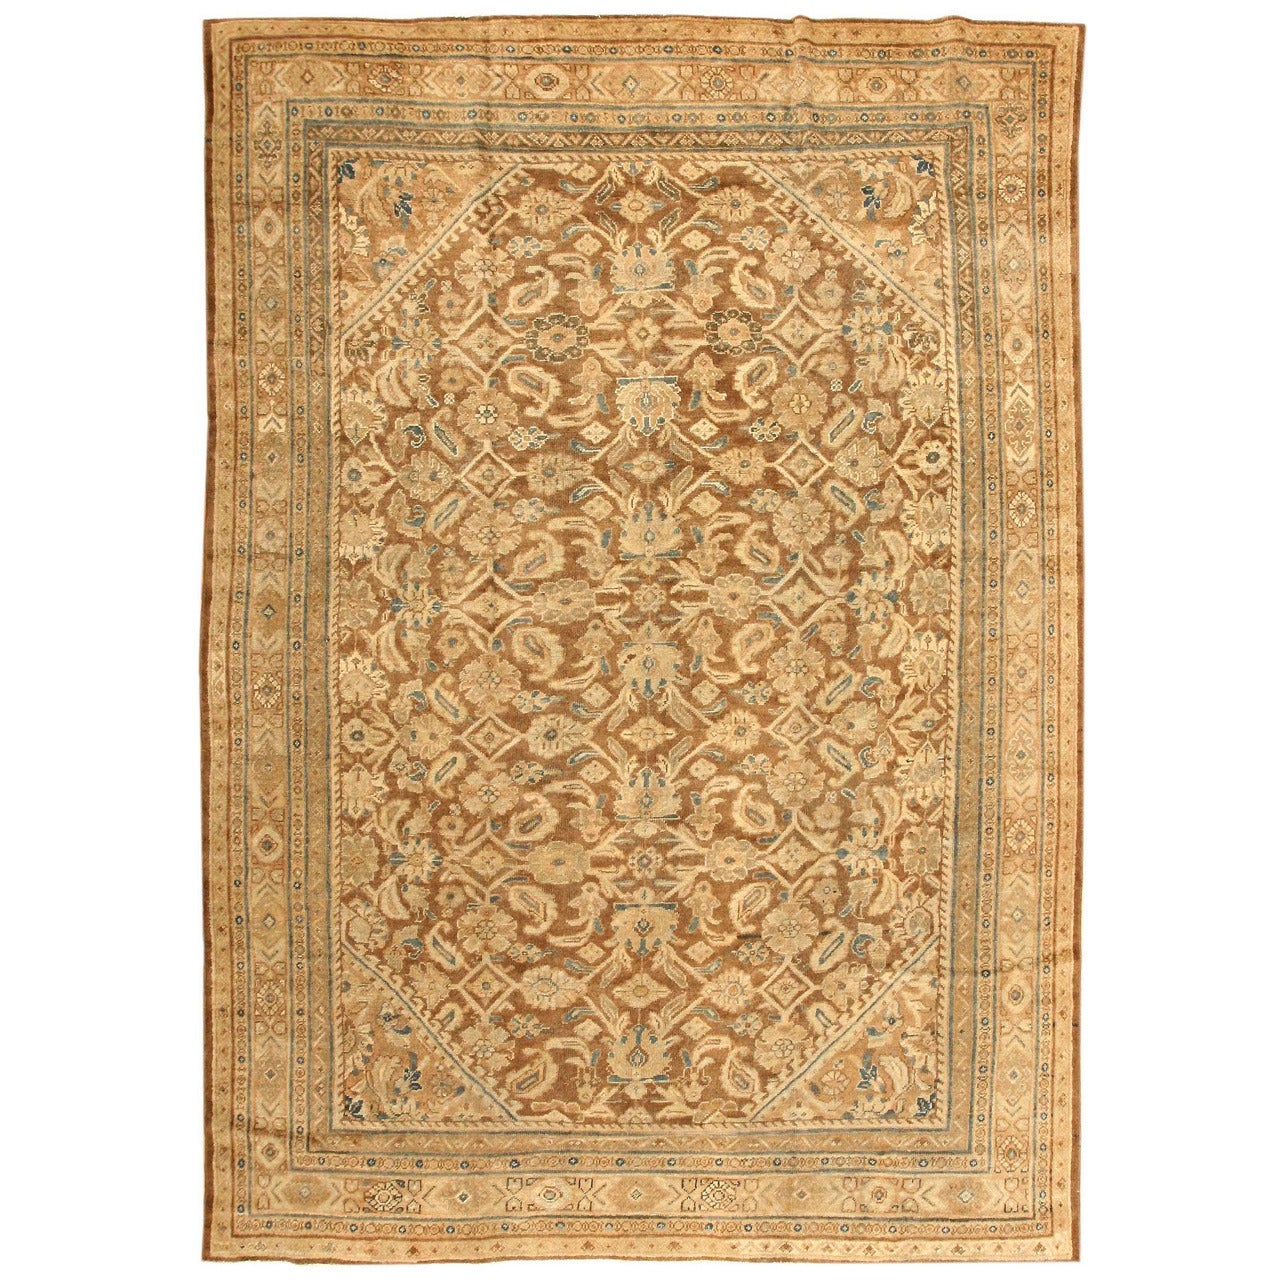 Antique Sultanabad Persian Rugs